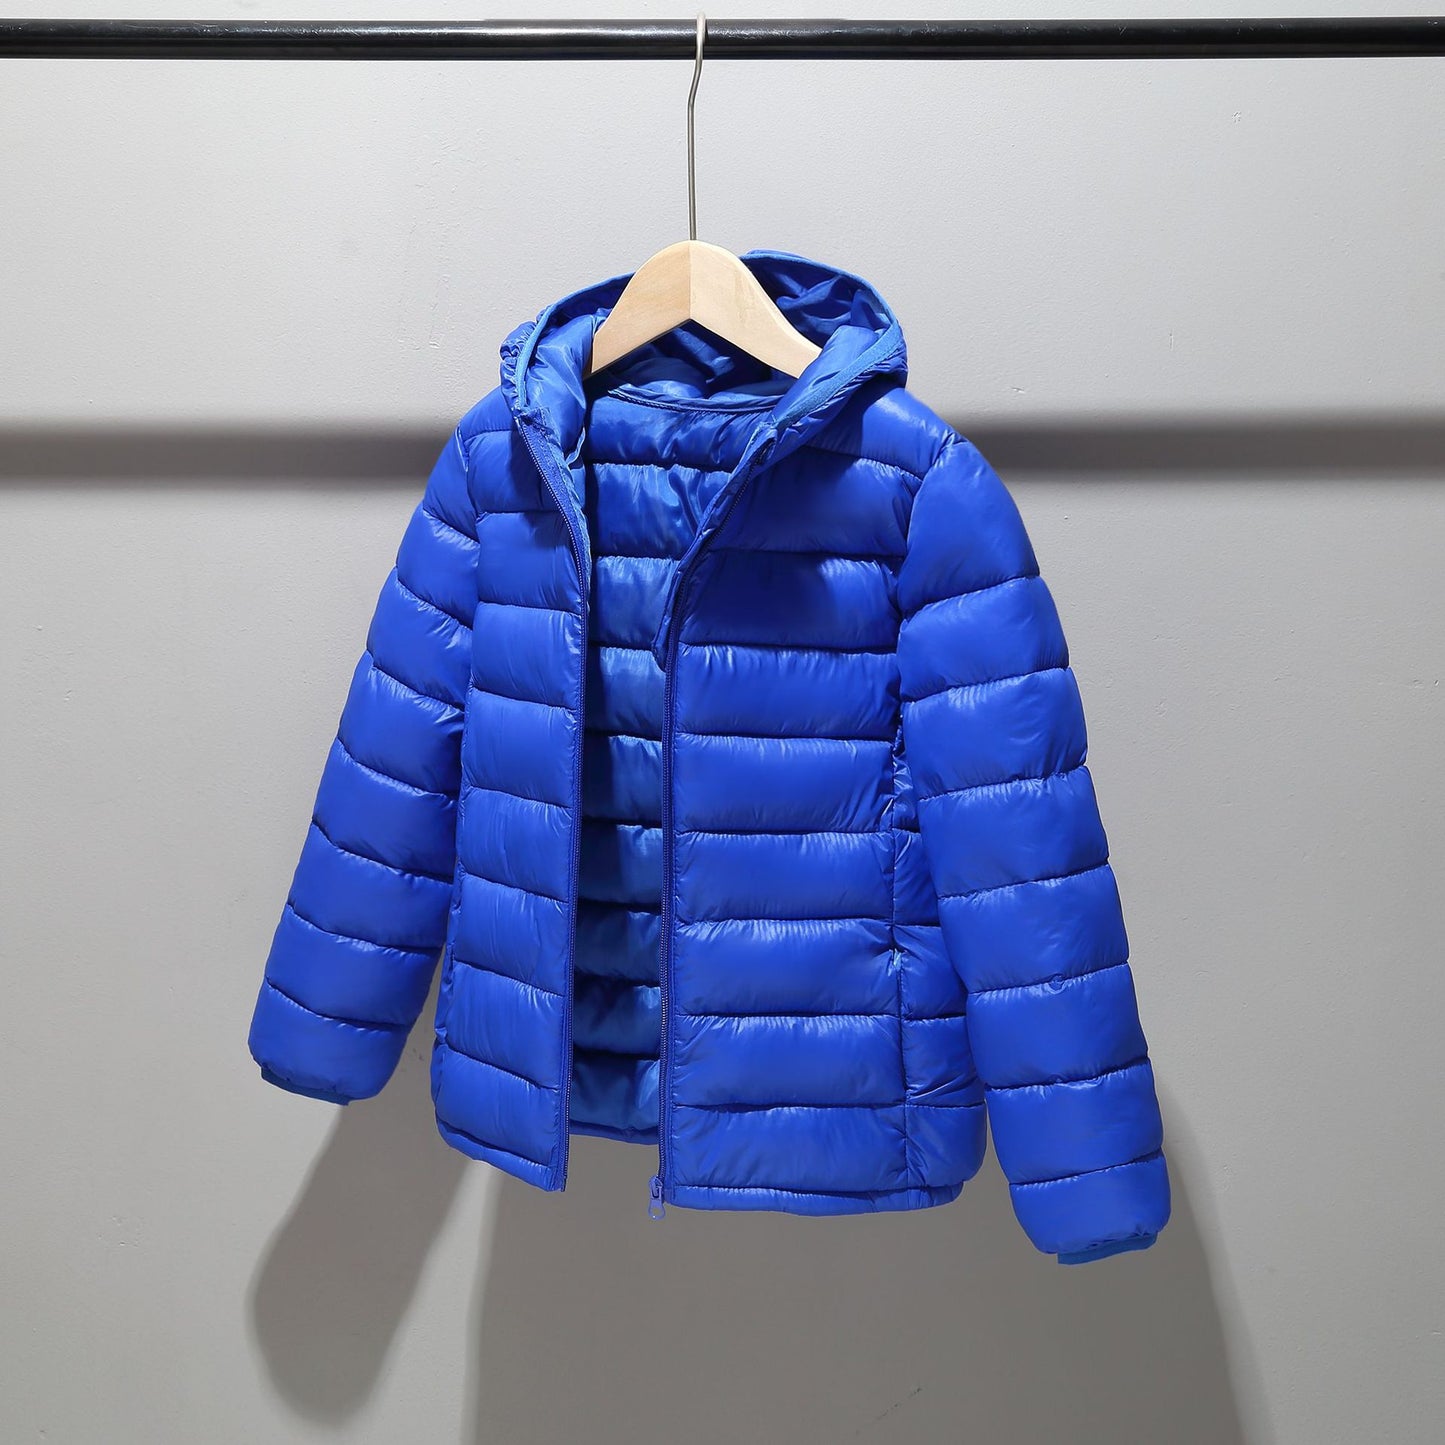 2-14 Years Autumn Winter Kids Down Jackets For Girls Children Clothes Warm Down Coats For Boys Toddler Girls Outerwear Clothes